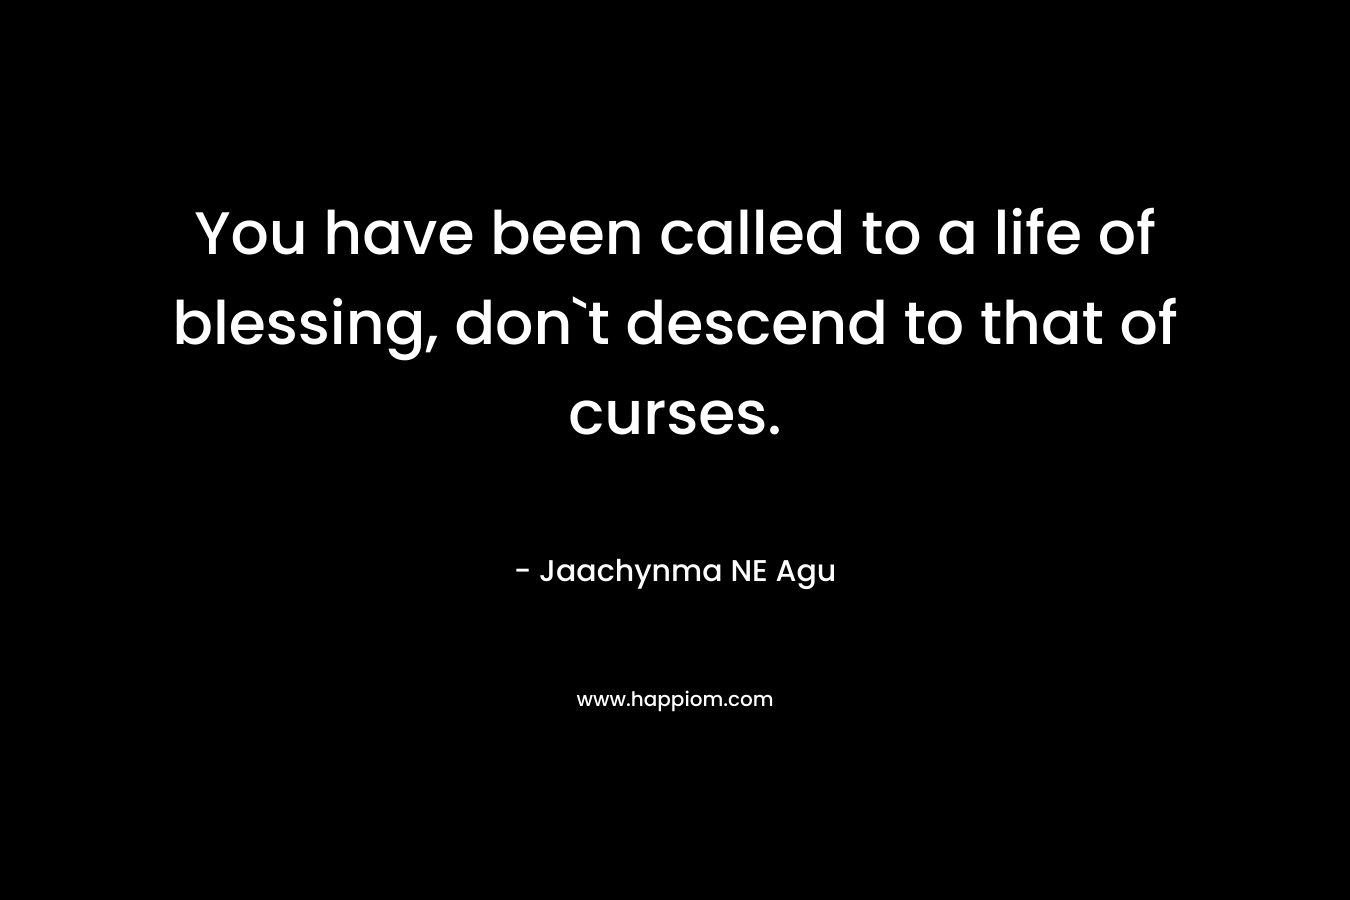 You have been called to a life of blessing, don`t descend to that of curses.